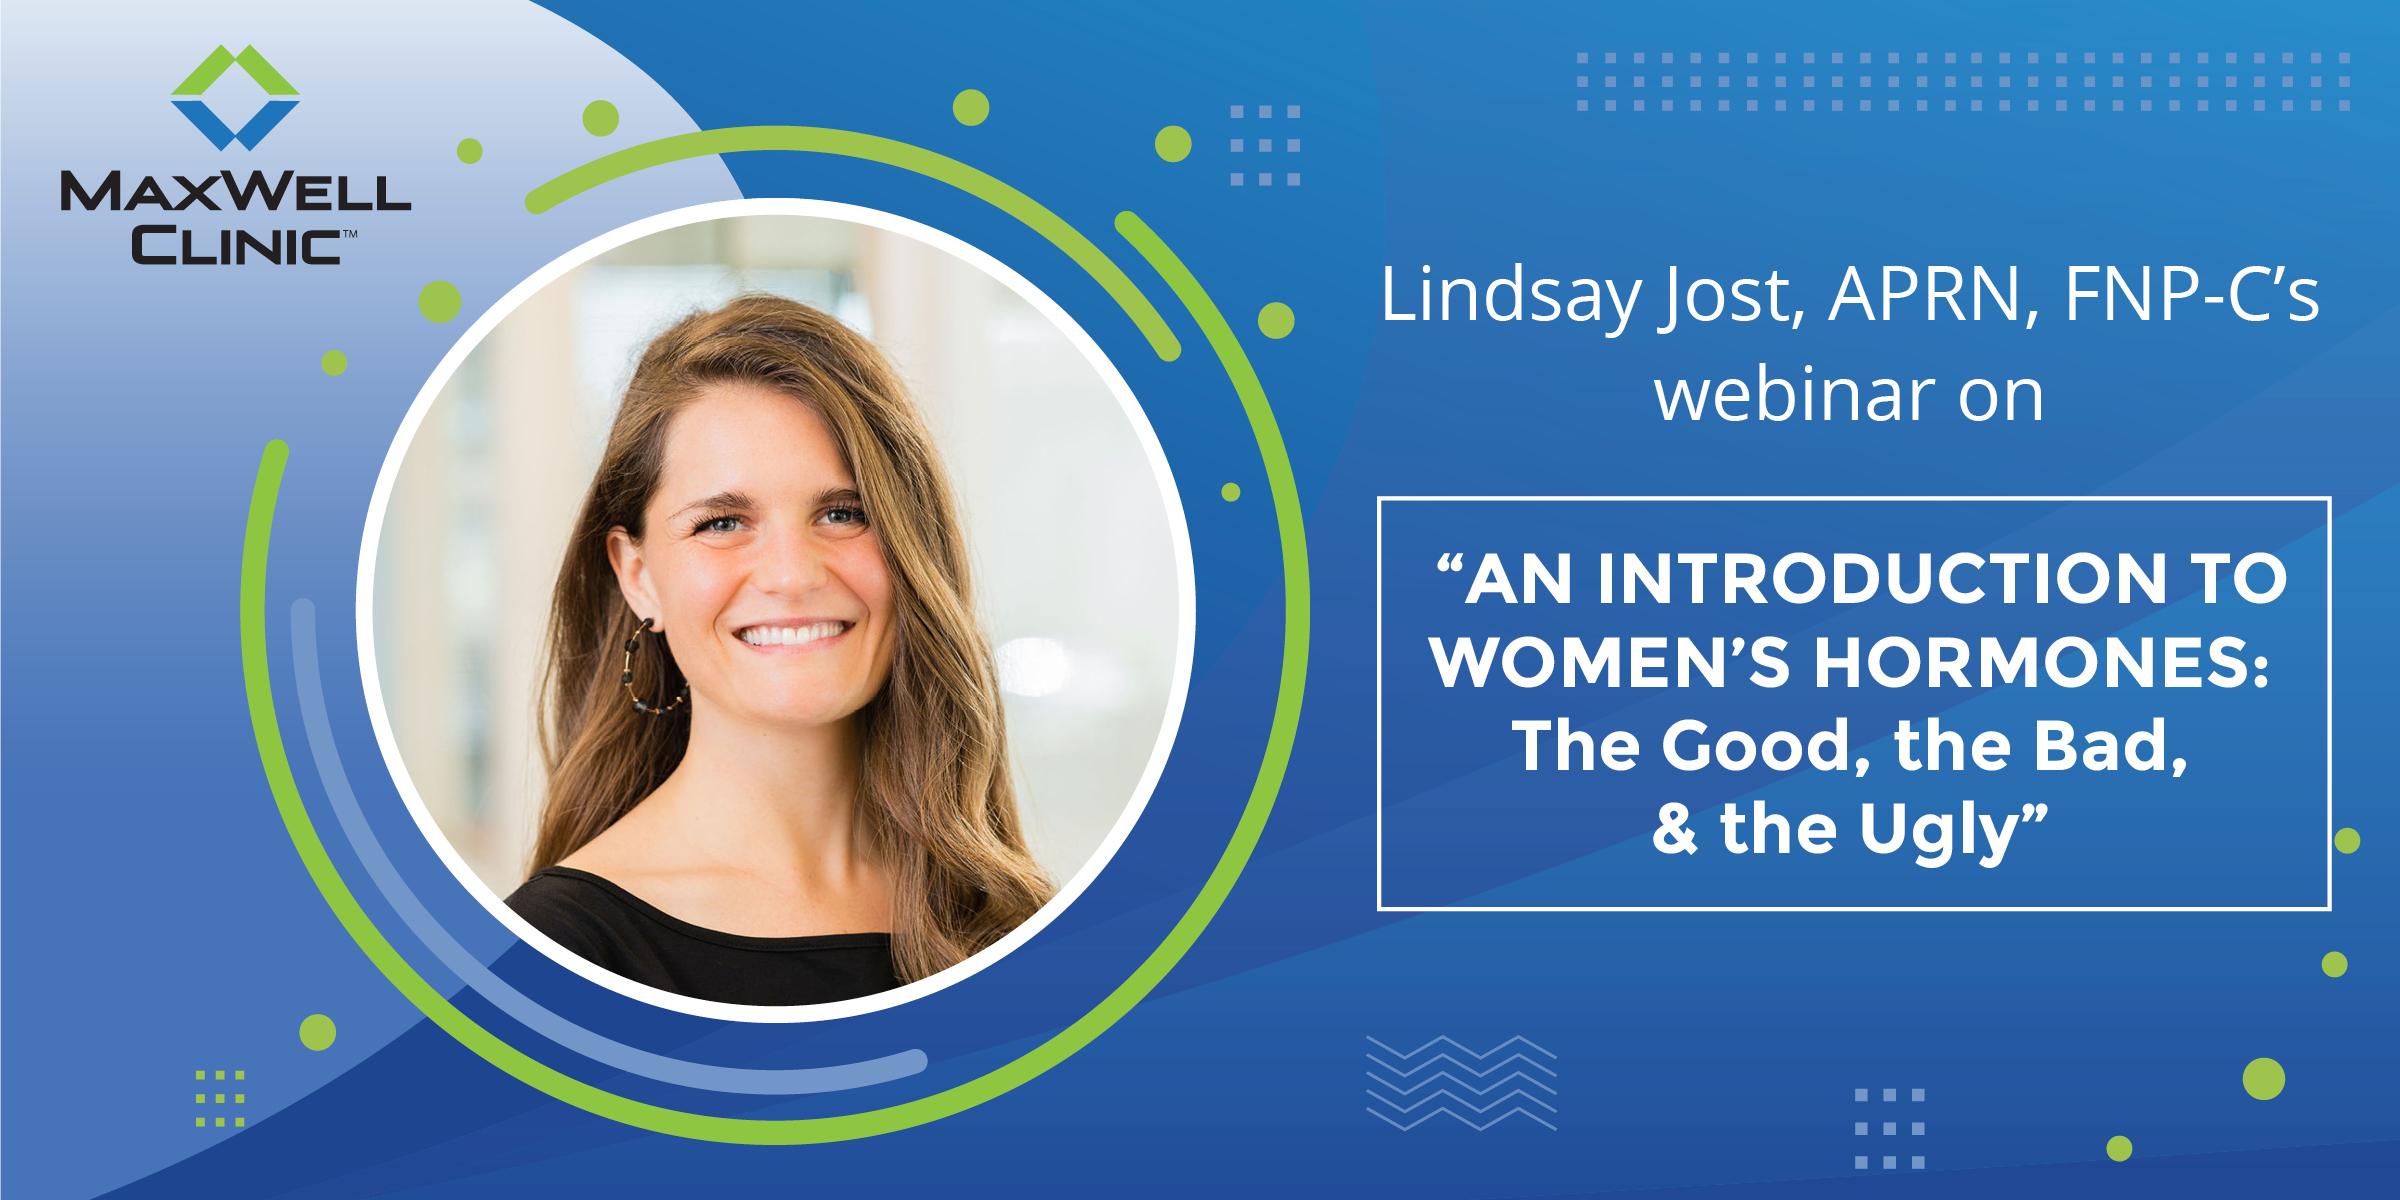 An Introduction to Women's Hormones:cThe Good, The Bad & The Ugly with Lindsay Jost, APRN, FNP-C